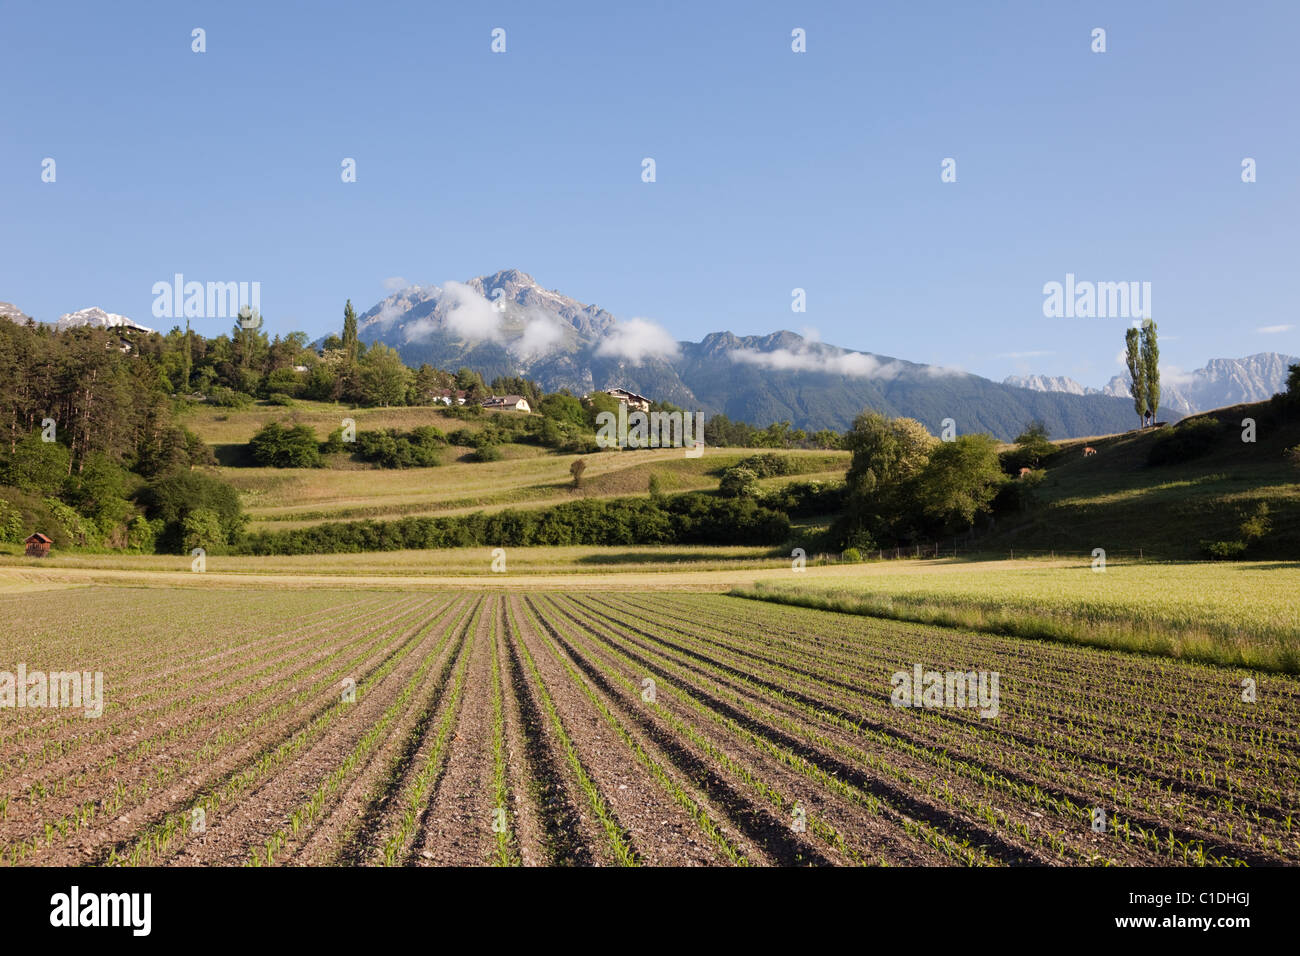 Imst Tyrol Austria Europe. Rows of newly planted crop in ploughed Alpine field in summer in early morning Stock Photo